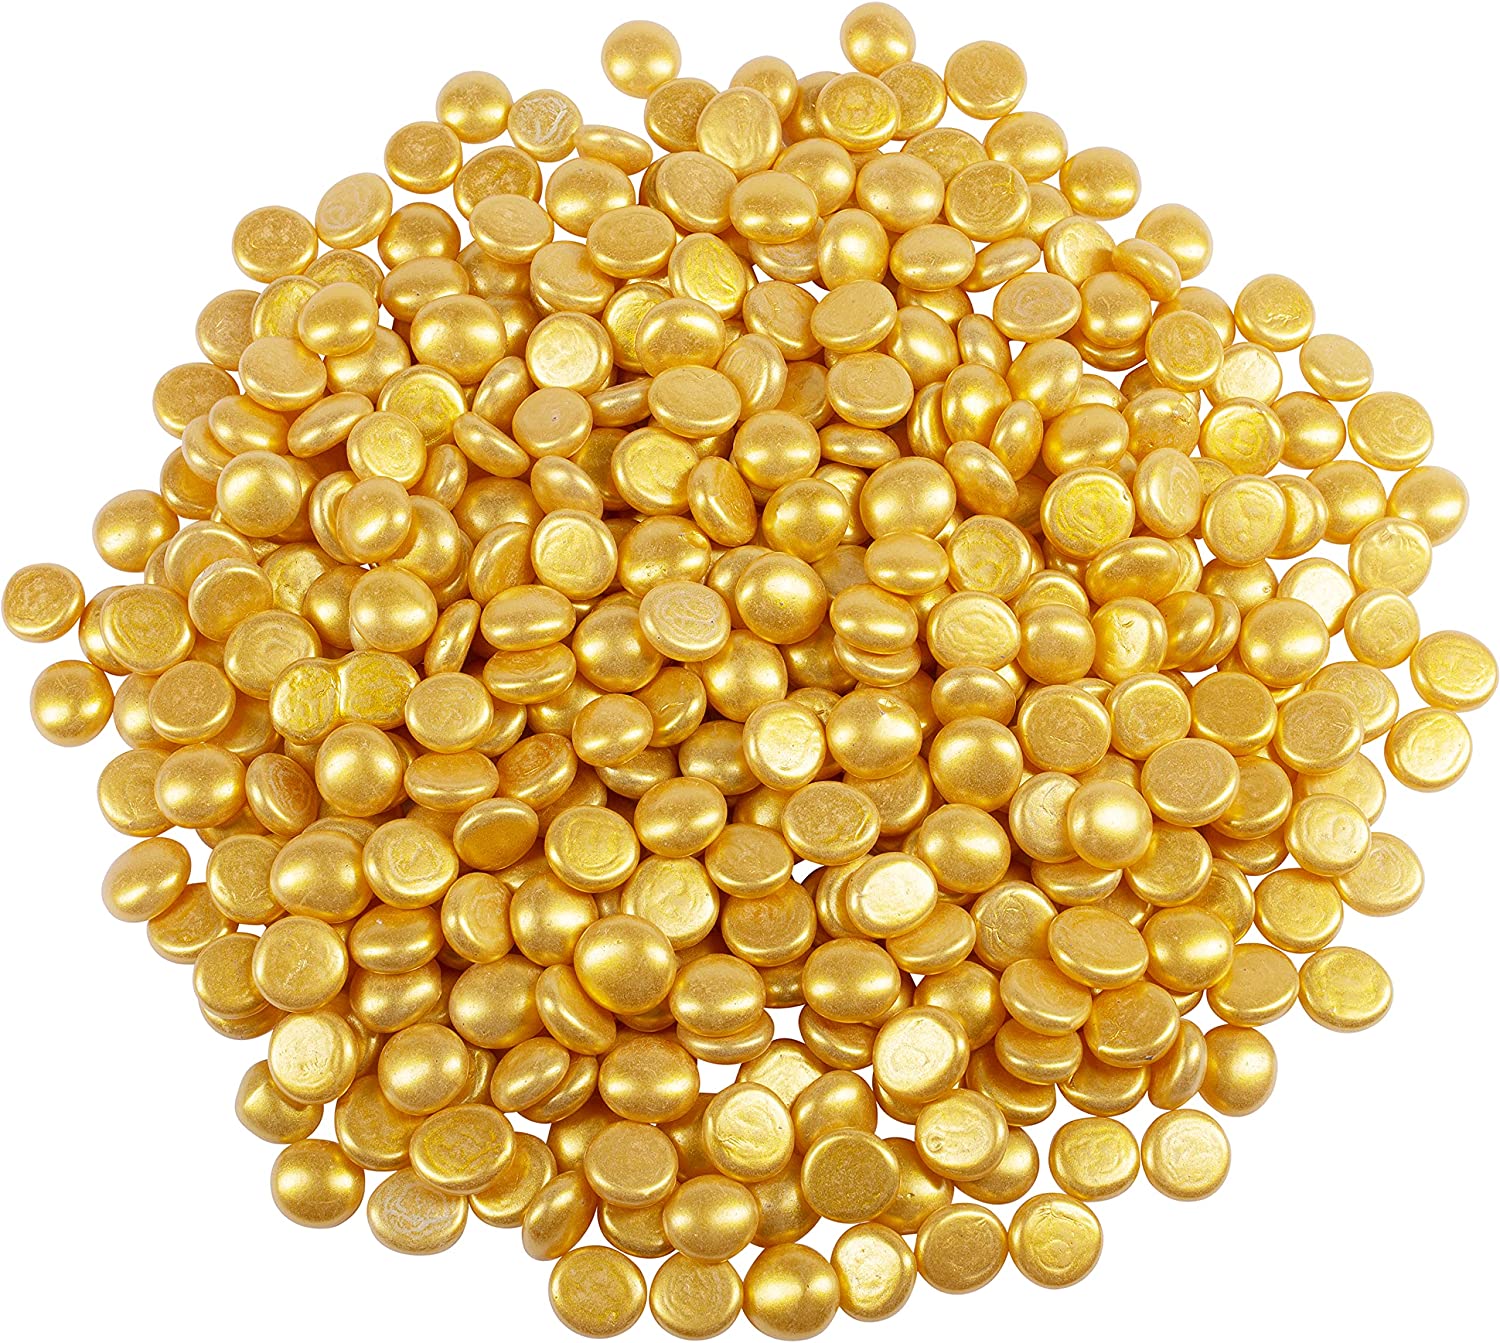 Galashield Gold Flat Glass Marbles for Vases Glass Gems Beads Pebbles Vase Filler 5 LBS, Approx. 450 PCS - image 1 of 7